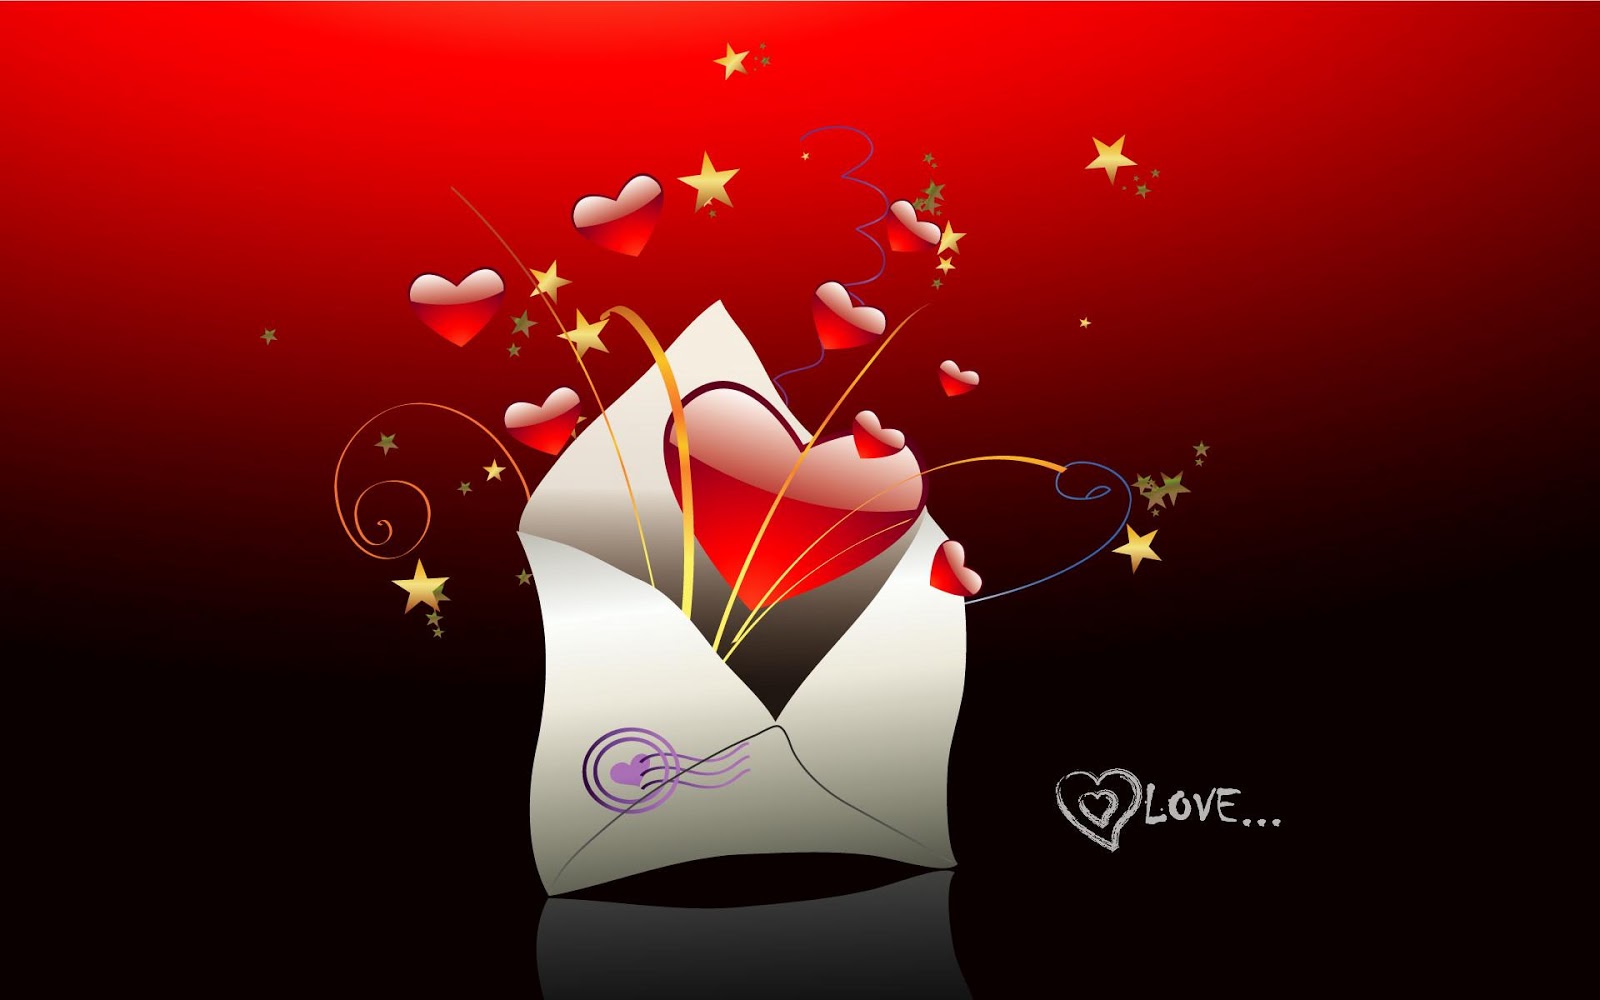 Free 3D Wallpapers Download: I love you wallpaper, i love you ...